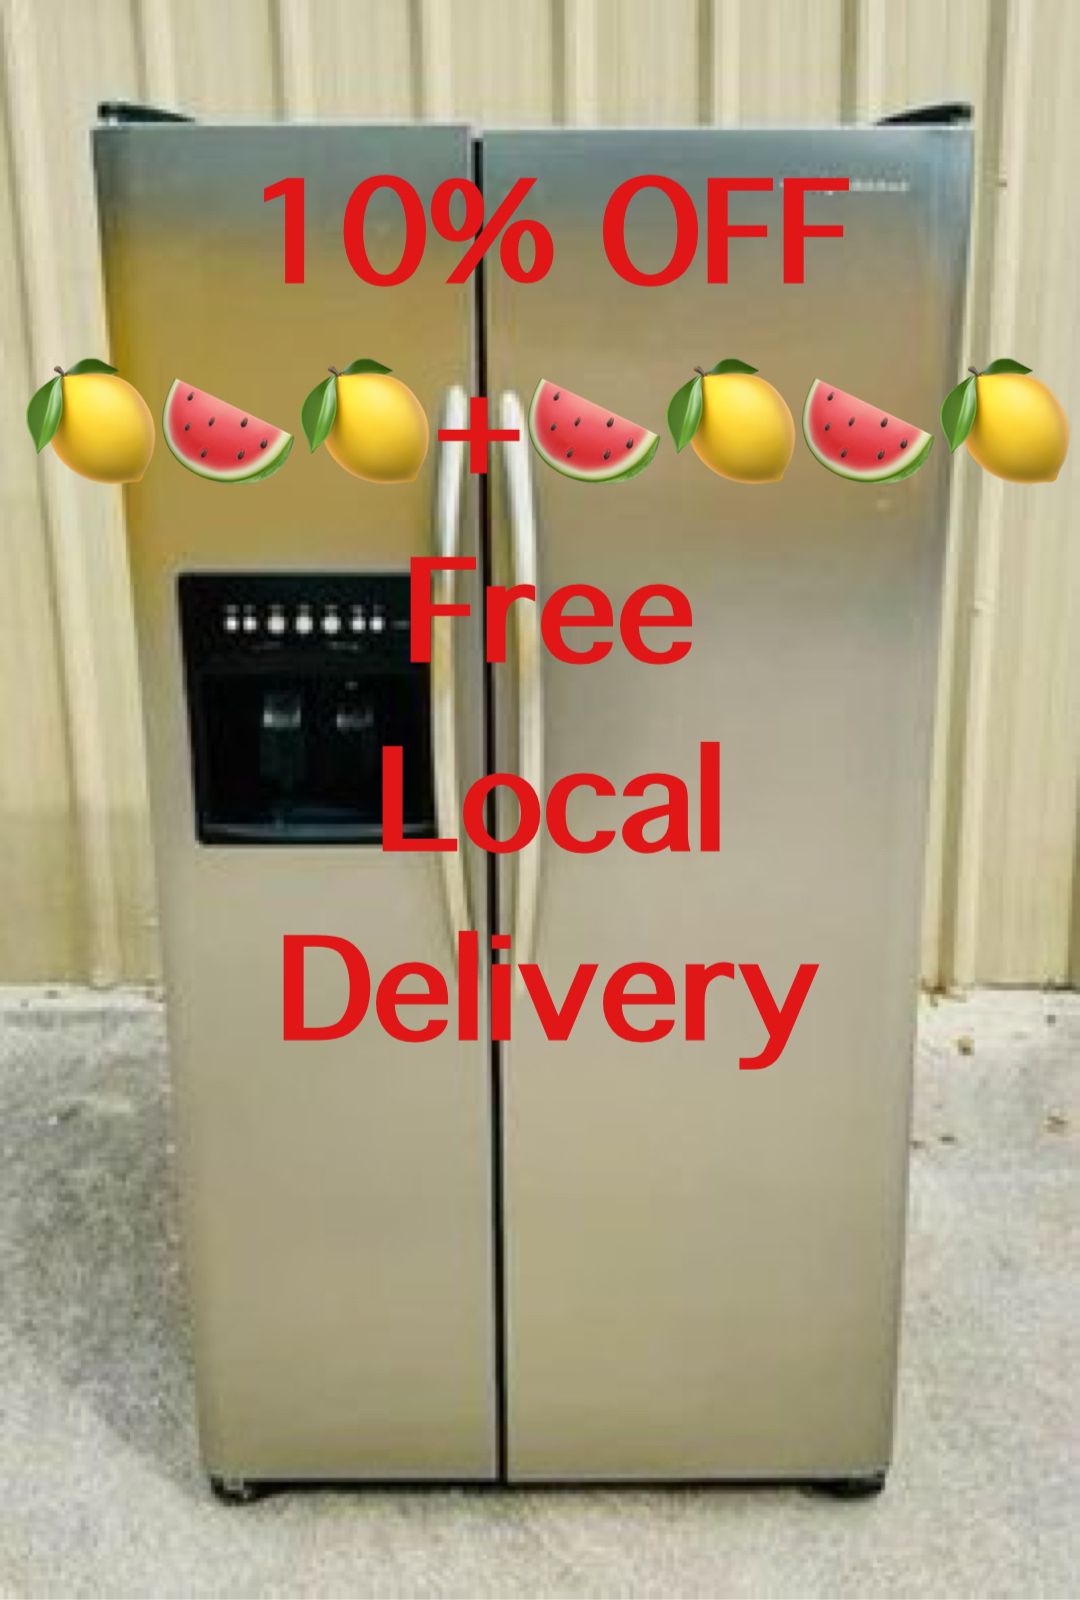 Refrigerator Whirlpool Gold Stainless Steel Clean Free Delivery 